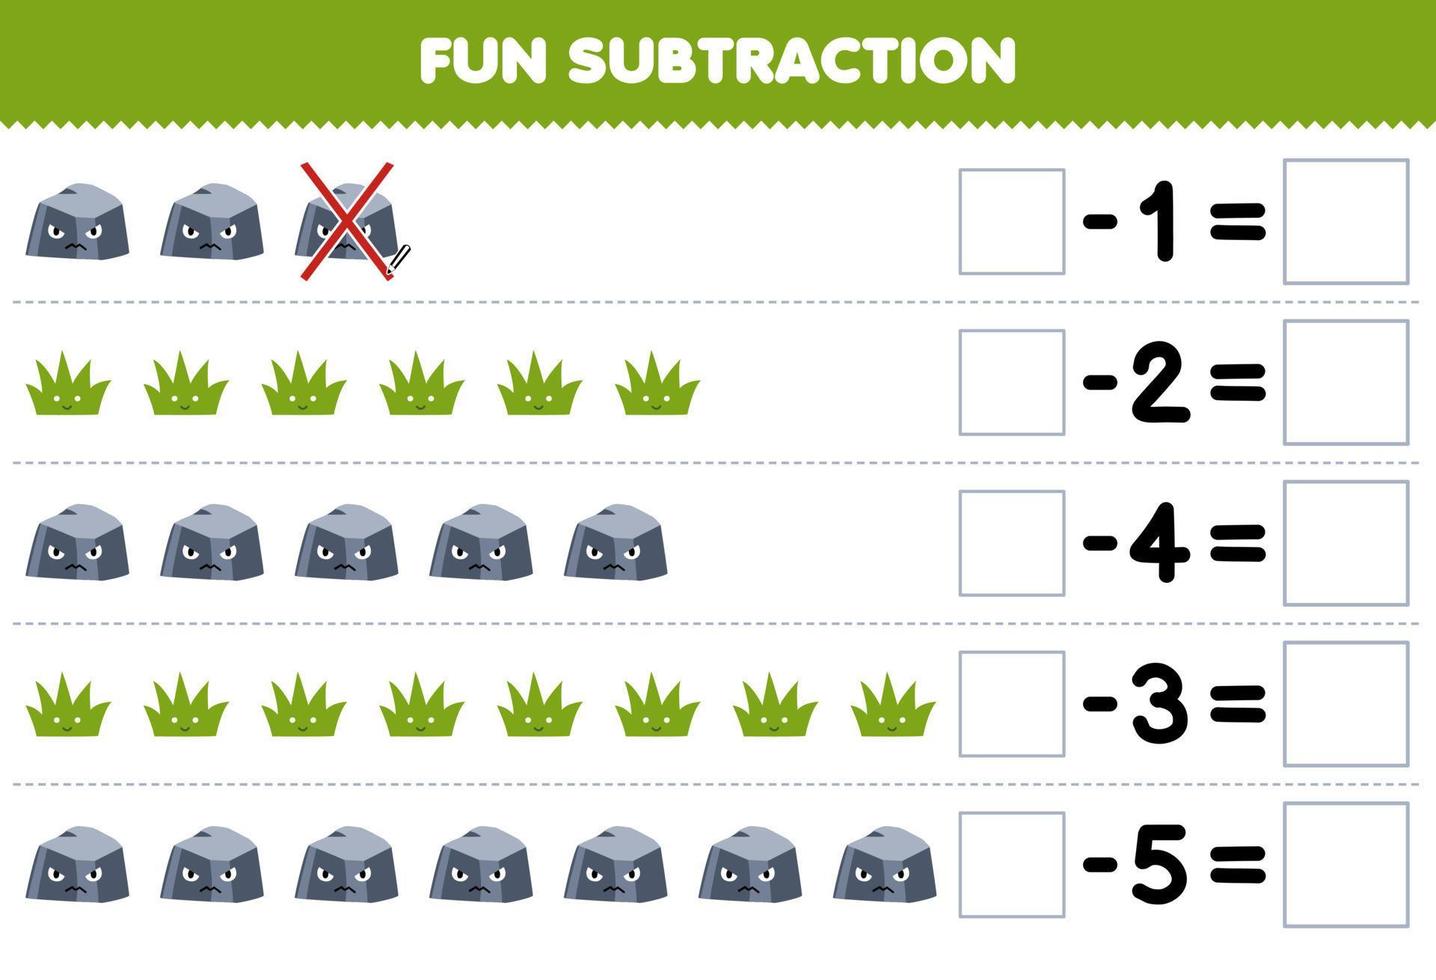 Education game for children fun subtraction by counting cute cartoon stone and grass each row and eliminating it printable nature worksheet vector